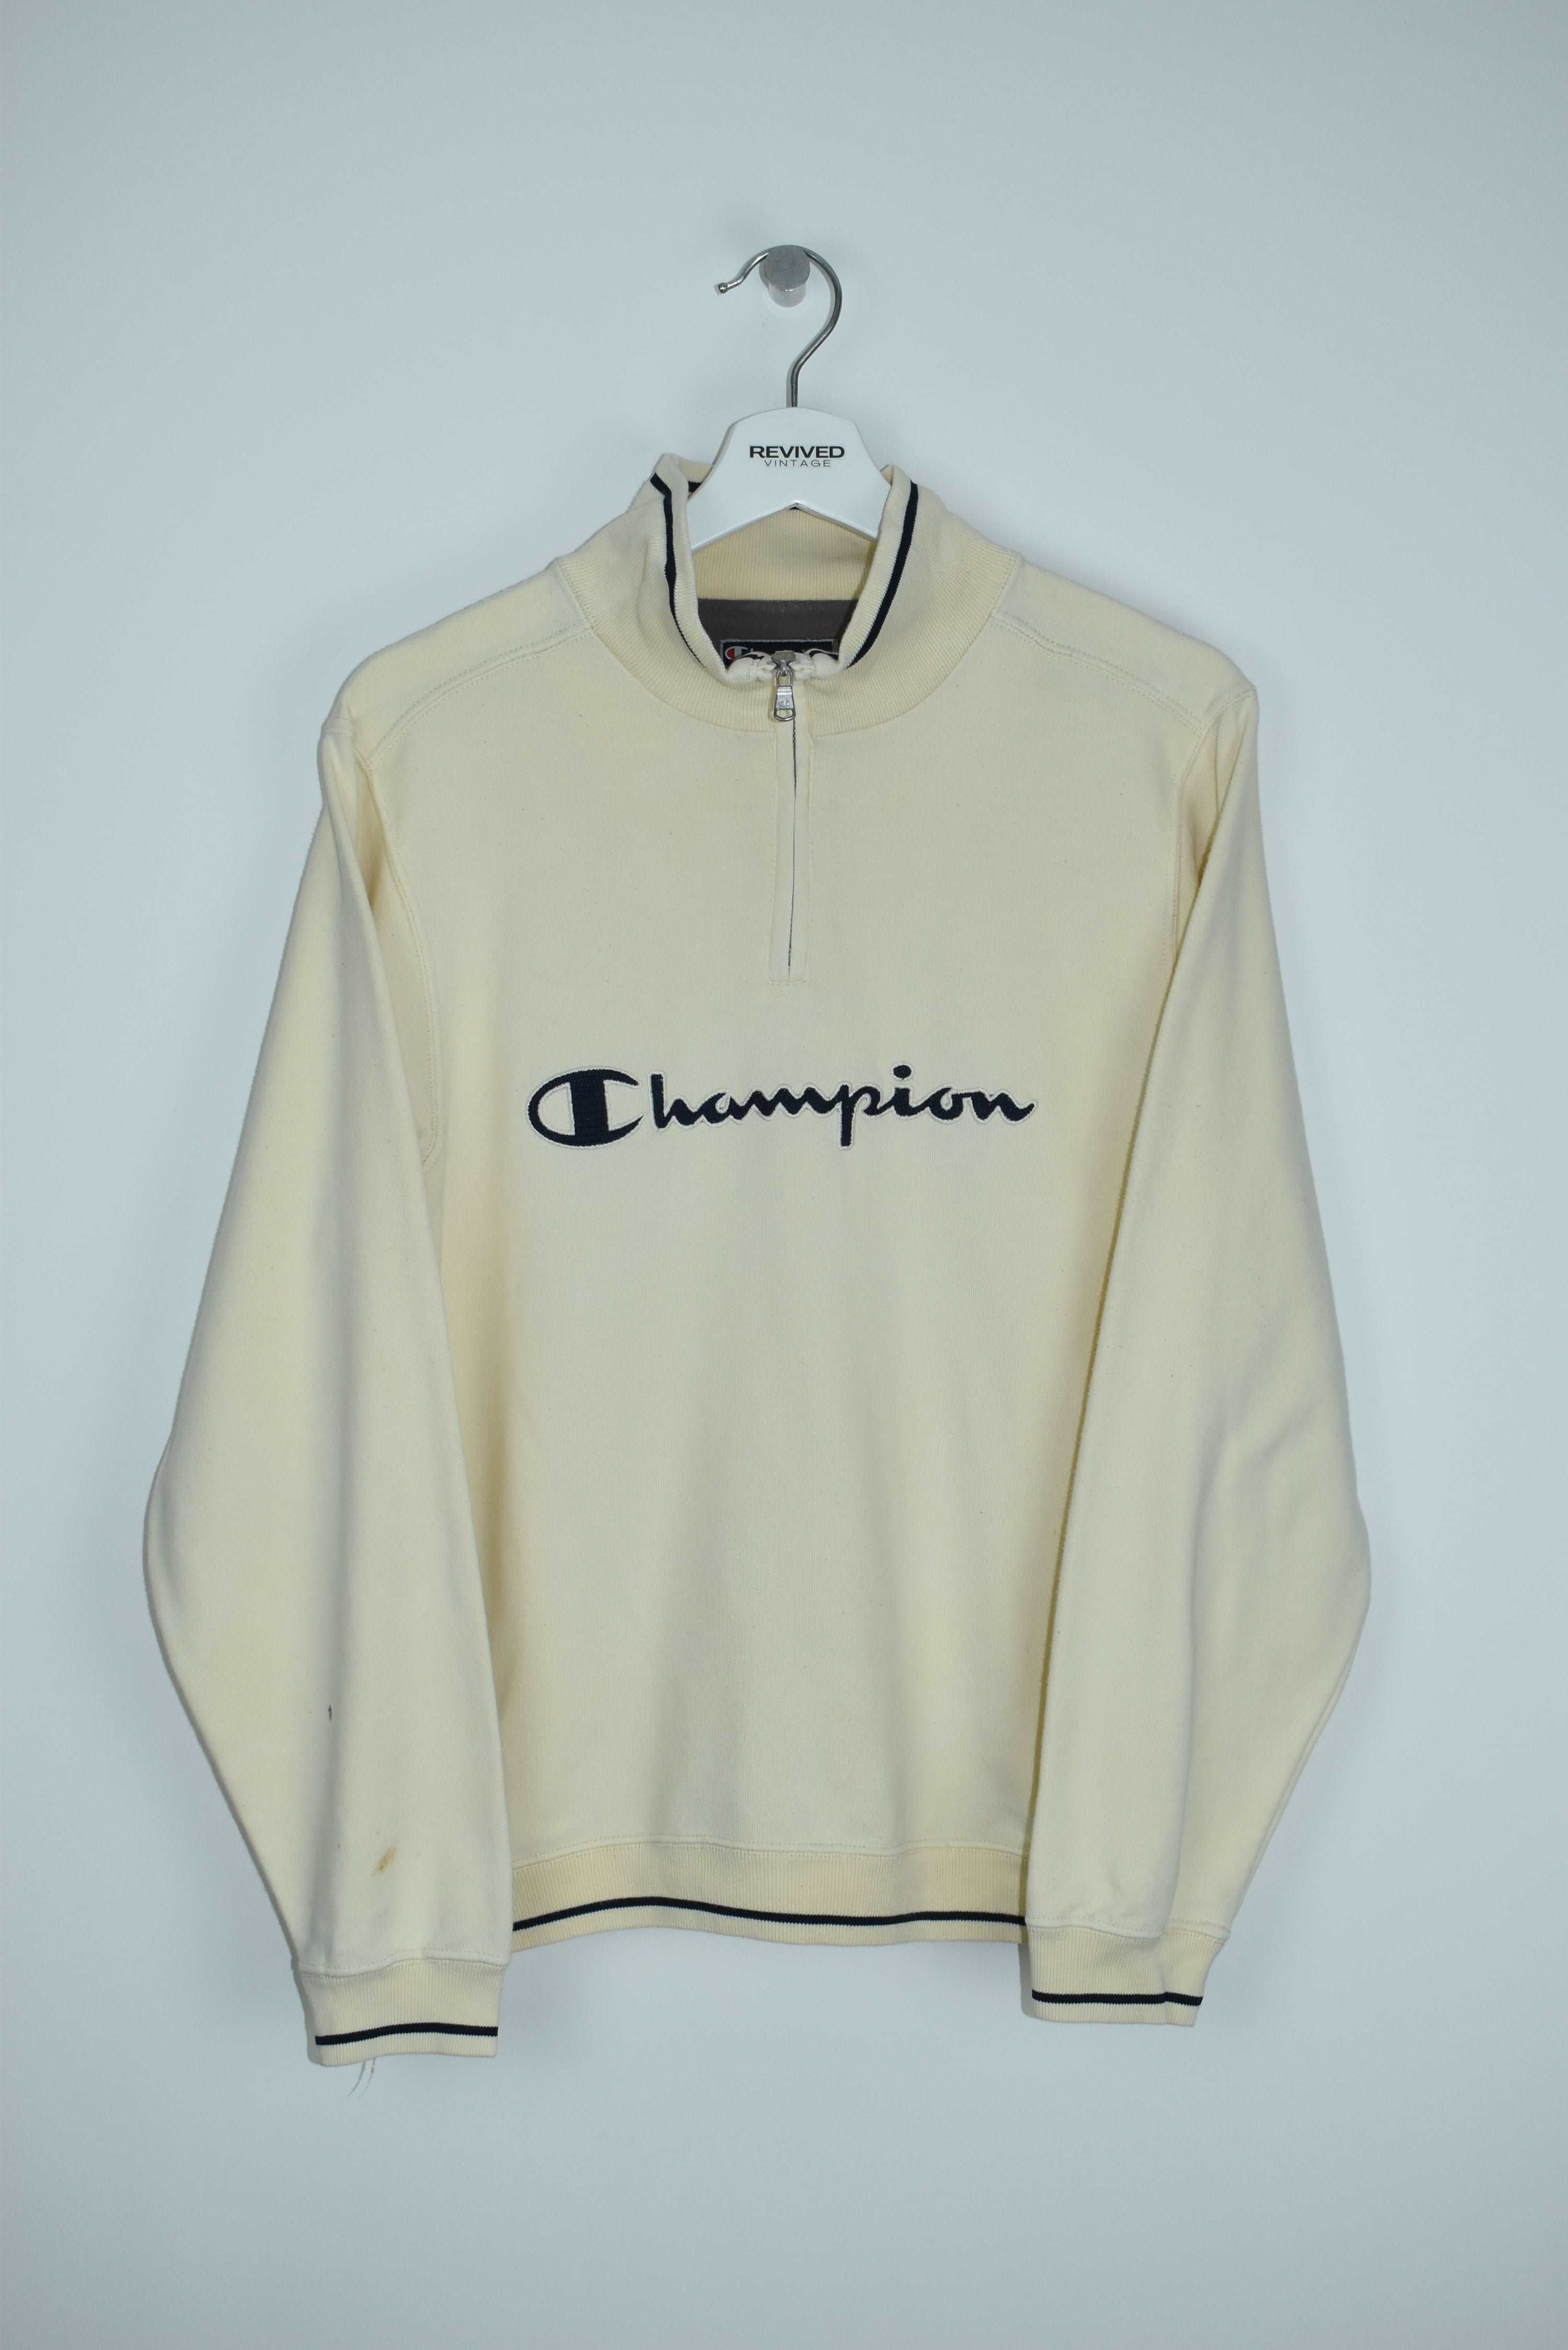 Vintage Champion Embroidered Spellout 1/4 Zip Sweatshirt Small